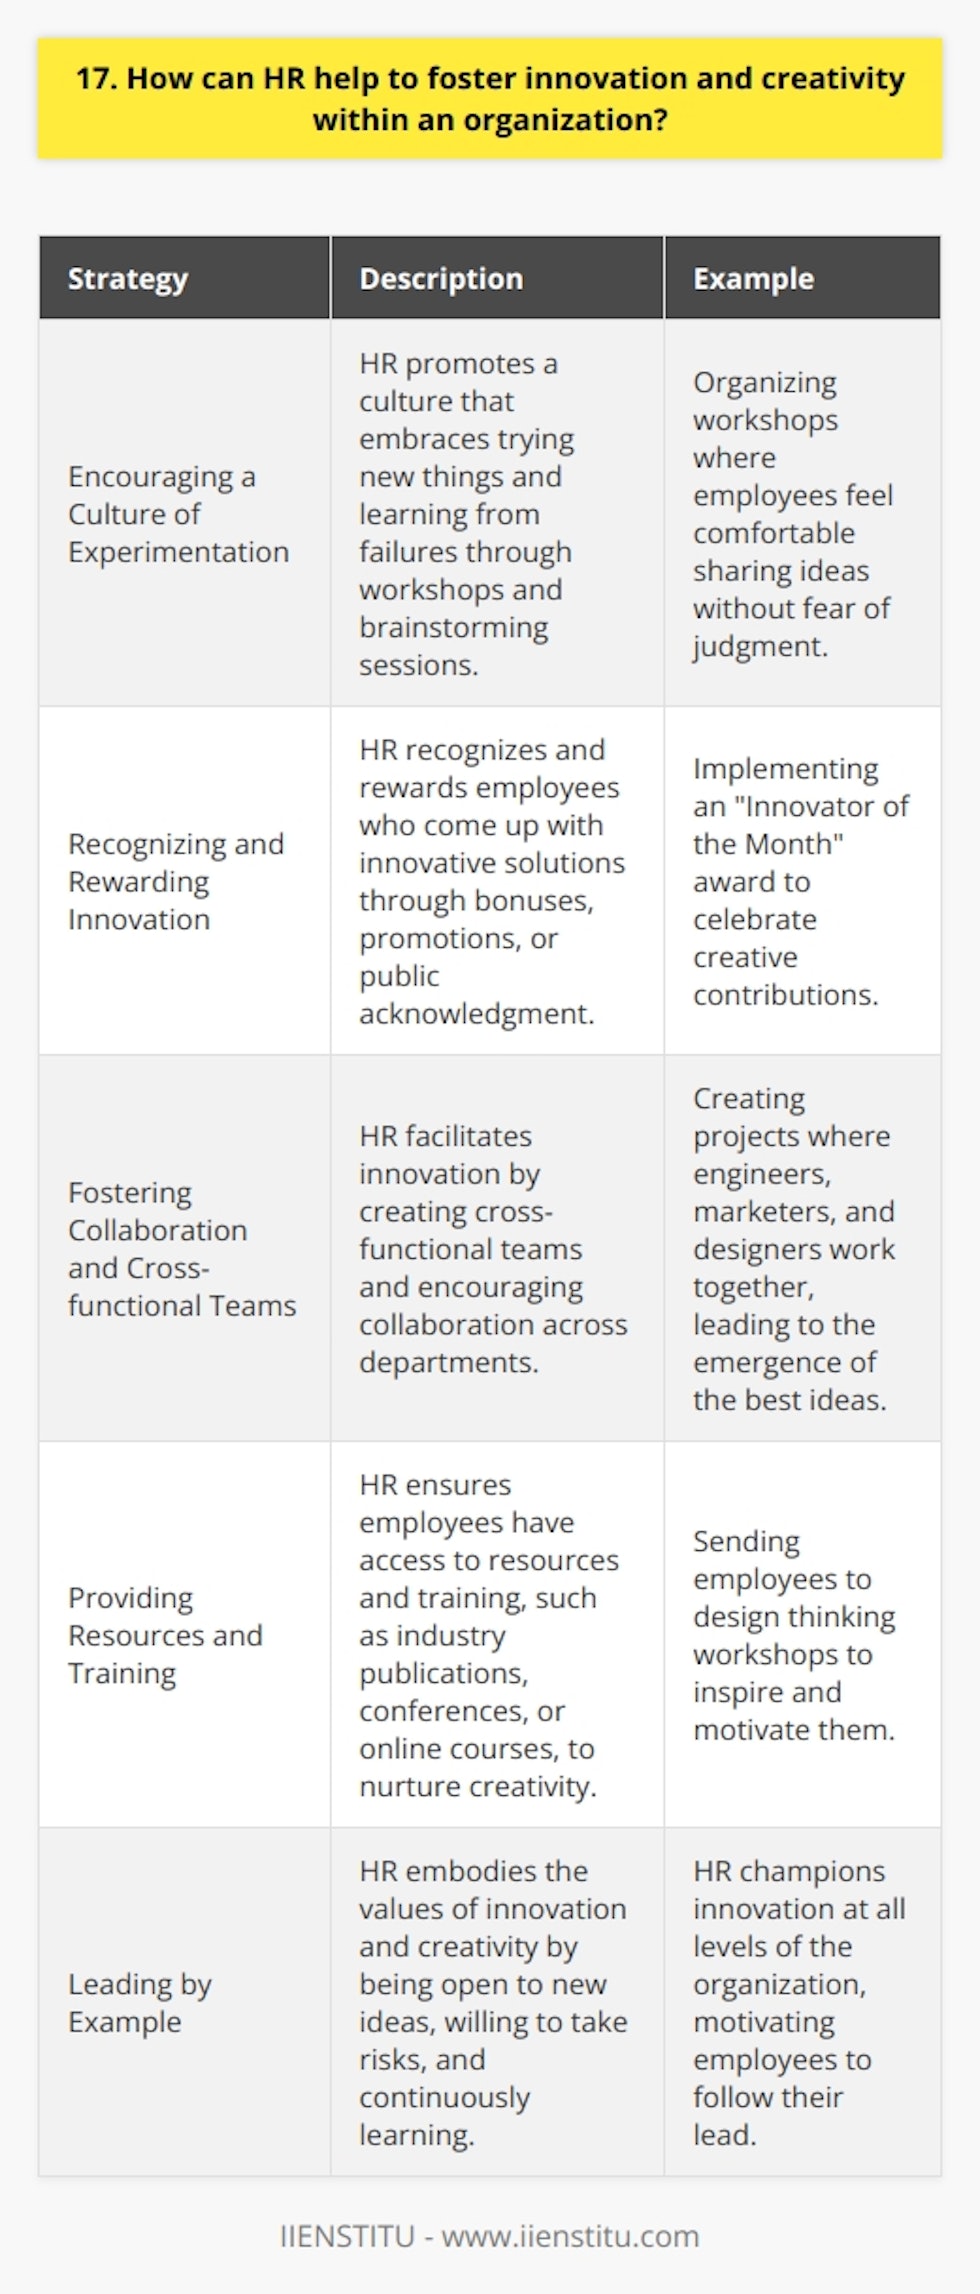 HR plays a crucial role in fostering innovation and creativity within an organization. Here are some ways they can contribute: Encouraging a Culture of Experimentation HR should promote a culture that embraces trying new things and learning from failures. They can organize workshops and brainstorming sessions where employees feel comfortable sharing ideas without fear of judgment. Recognizing and Rewarding Innovation Its important for HR to recognize and reward employees who come up with innovative solutions. This could be through bonuses, promotions, or even simple public acknowledgment. When I worked at my previous company, HR implemented an  Innovator of the Month  award to celebrate creative contributions. Fostering Collaboration and Cross-functional Teams Innovation often happens when diverse perspectives come together. HR can facilitate this by creating cross-functional teams and encouraging collaboration across departments. In my experience, some of the best ideas emerged when we had engineers, marketers, and designers all working together on a project. Providing Resources and Training To nurture creativity, HR should ensure employees have access to the resources and training they need. This might include subscriptions to industry publications, attending conferences, or taking online courses. I remember feeling so inspired after my company sent me to a design thinking workshop. Leading by Example Finally, HR themselves must embody the values of innovation and creativity. They should be open to new ideas, willing to take risks, and continuously learning. As an employee, its motivating to see HR walking the talk and championing innovation at all levels of the organization.